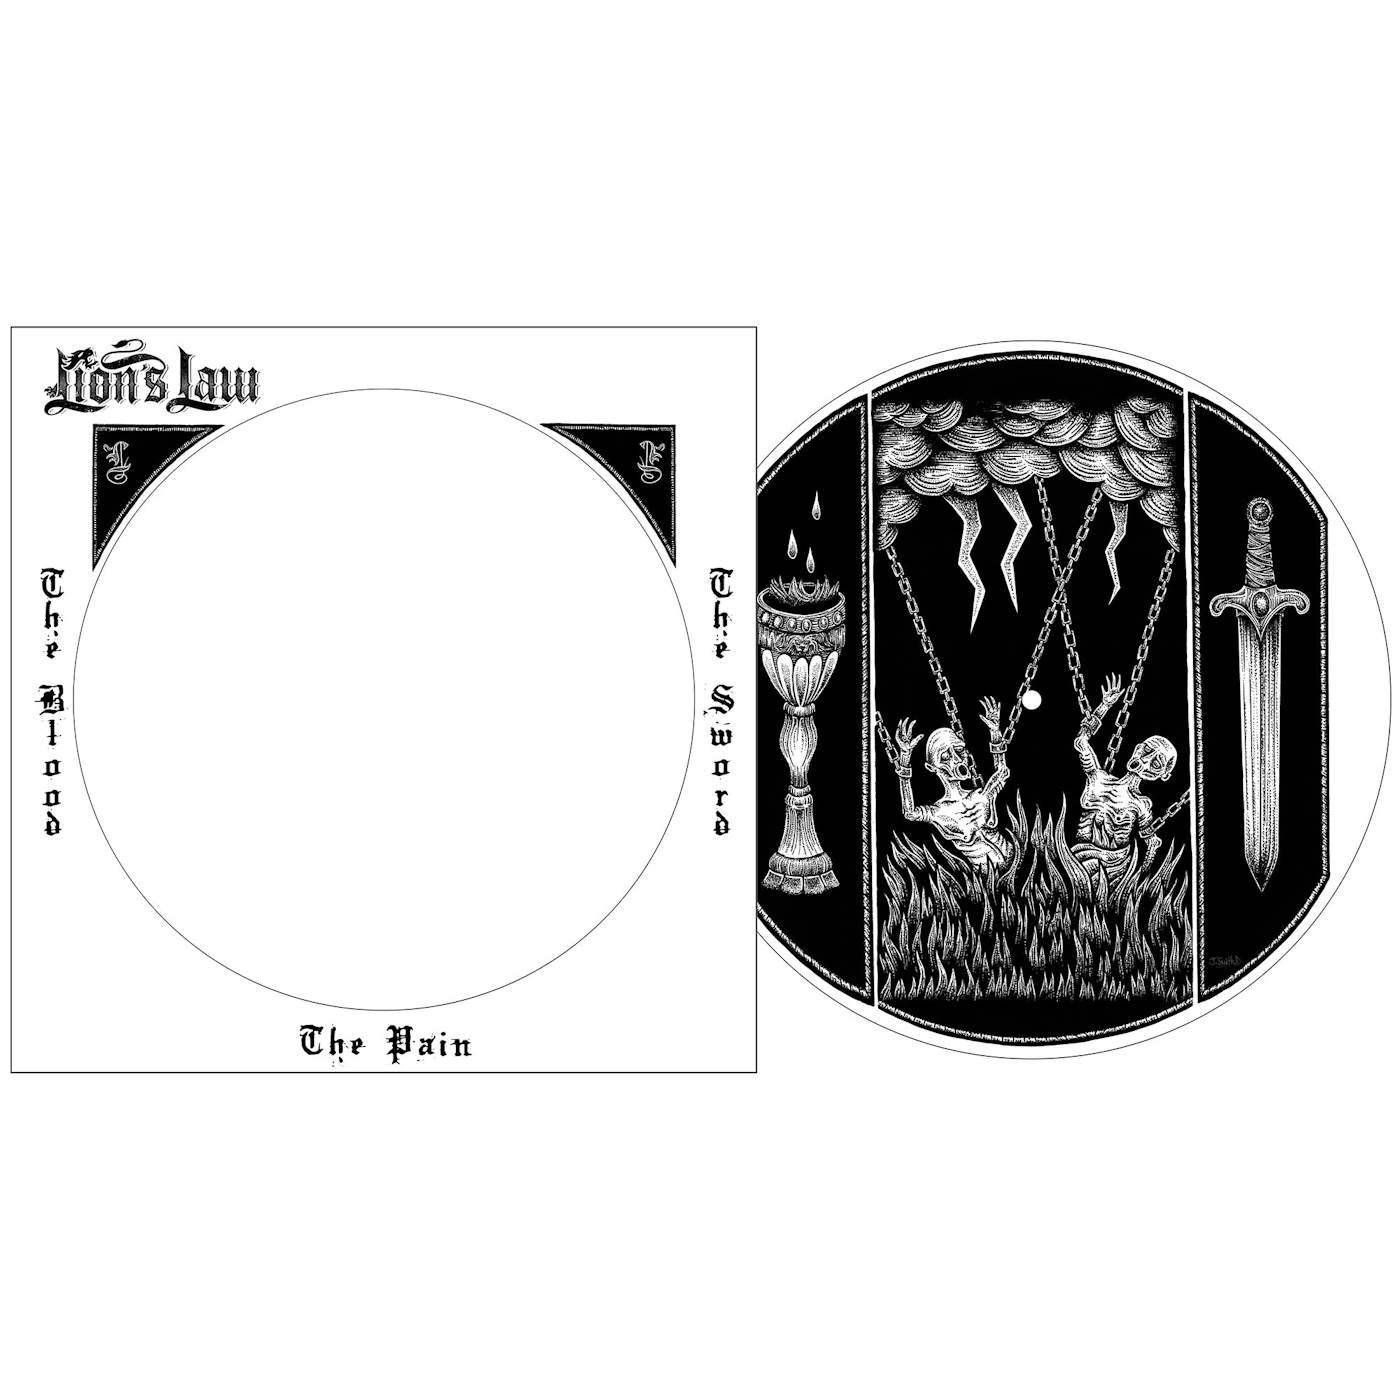 Lion's Law - The Pain, The Blood, and The Sword Picture Disc